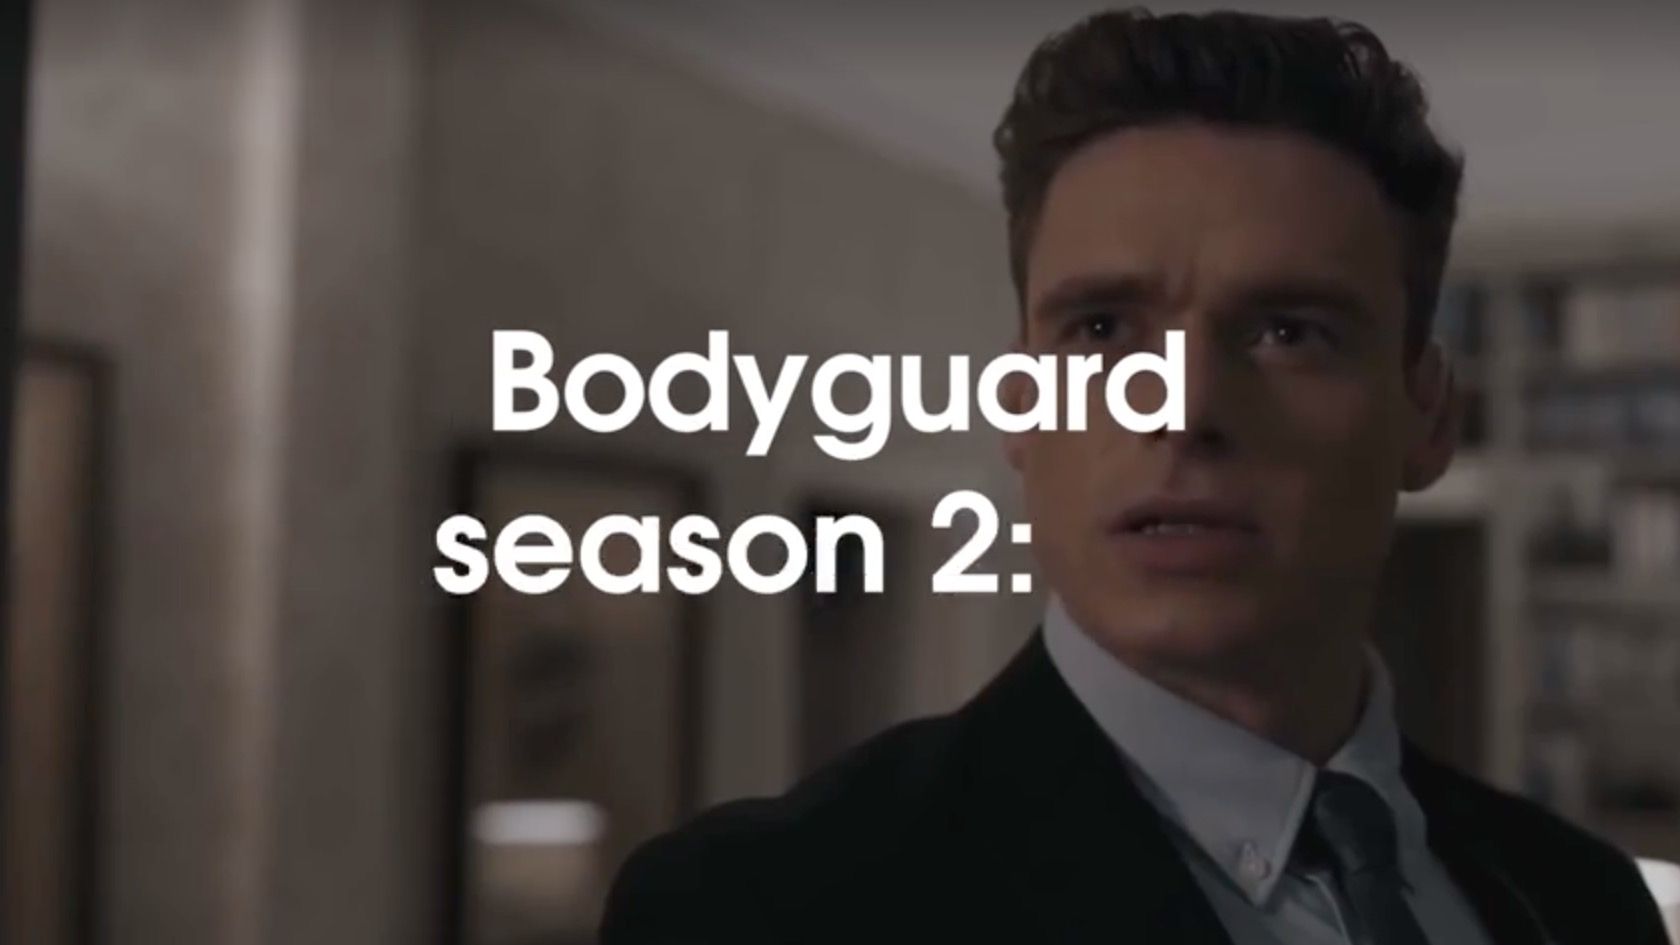 Rumorville: 'Bodyguard' Creator Is in Talks With BBC for a Season 2 + More  Projects to Watch